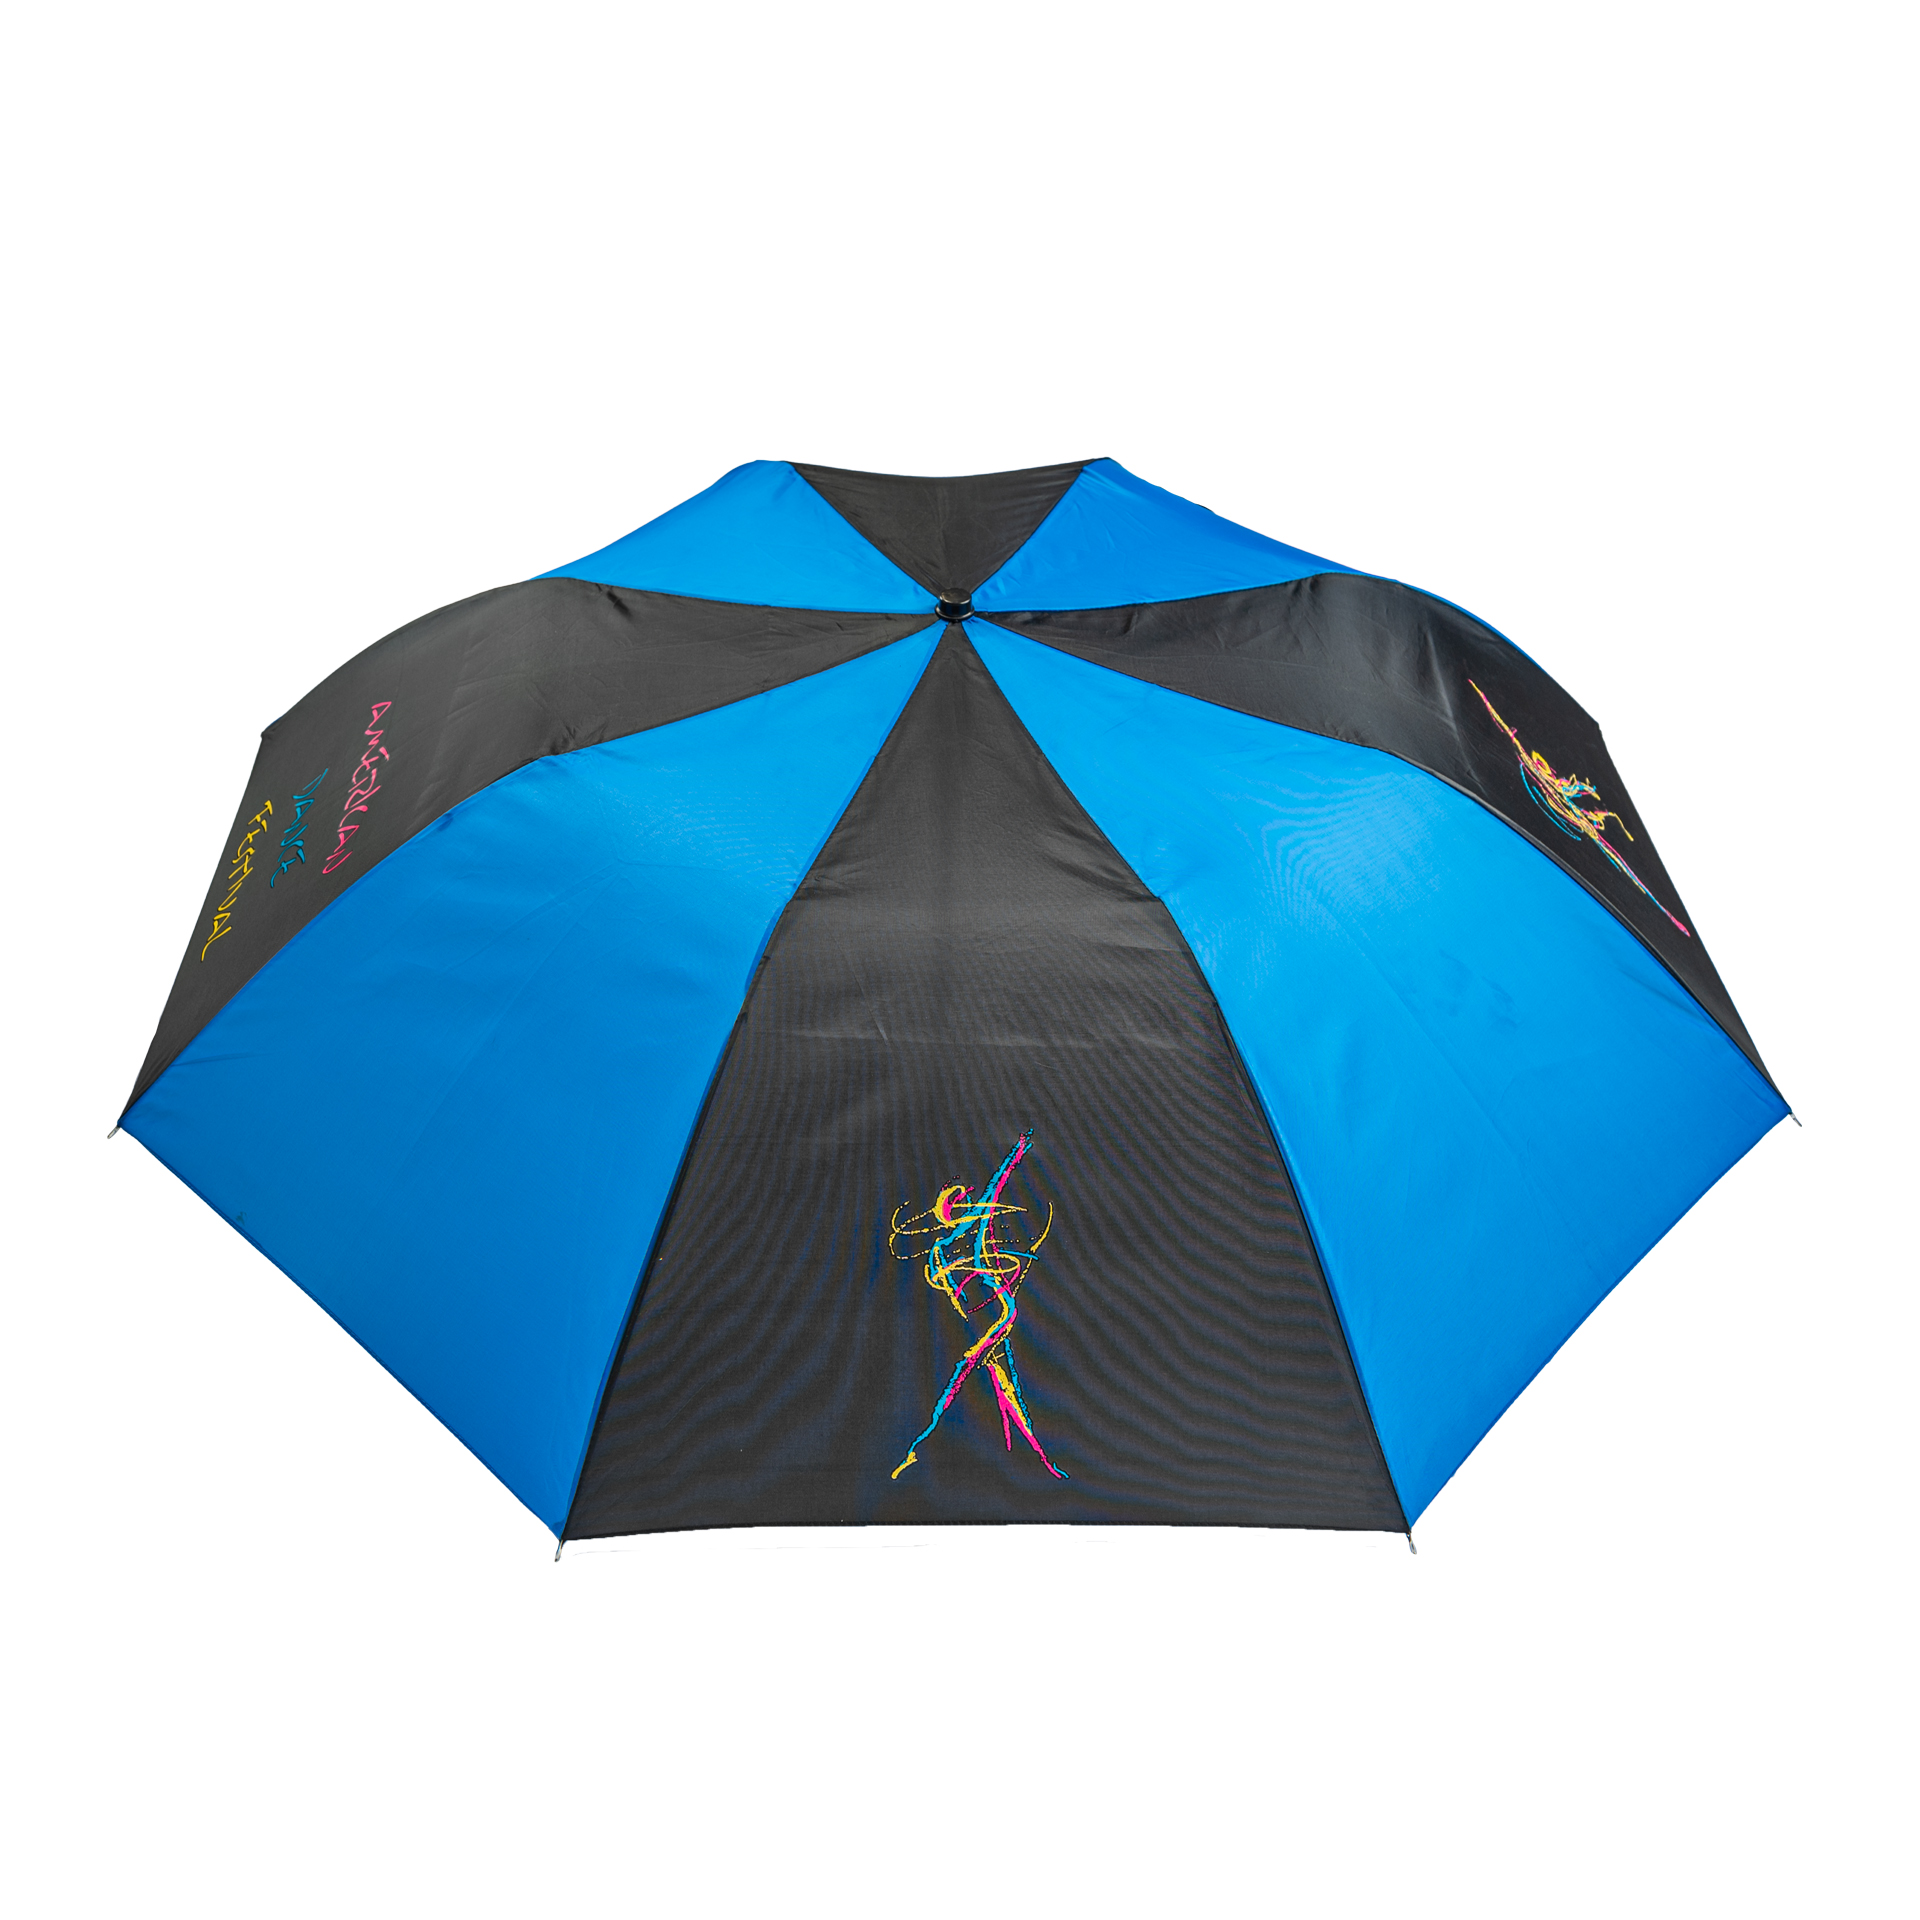 A blue and black umbrella with colorful illustrations of dancers